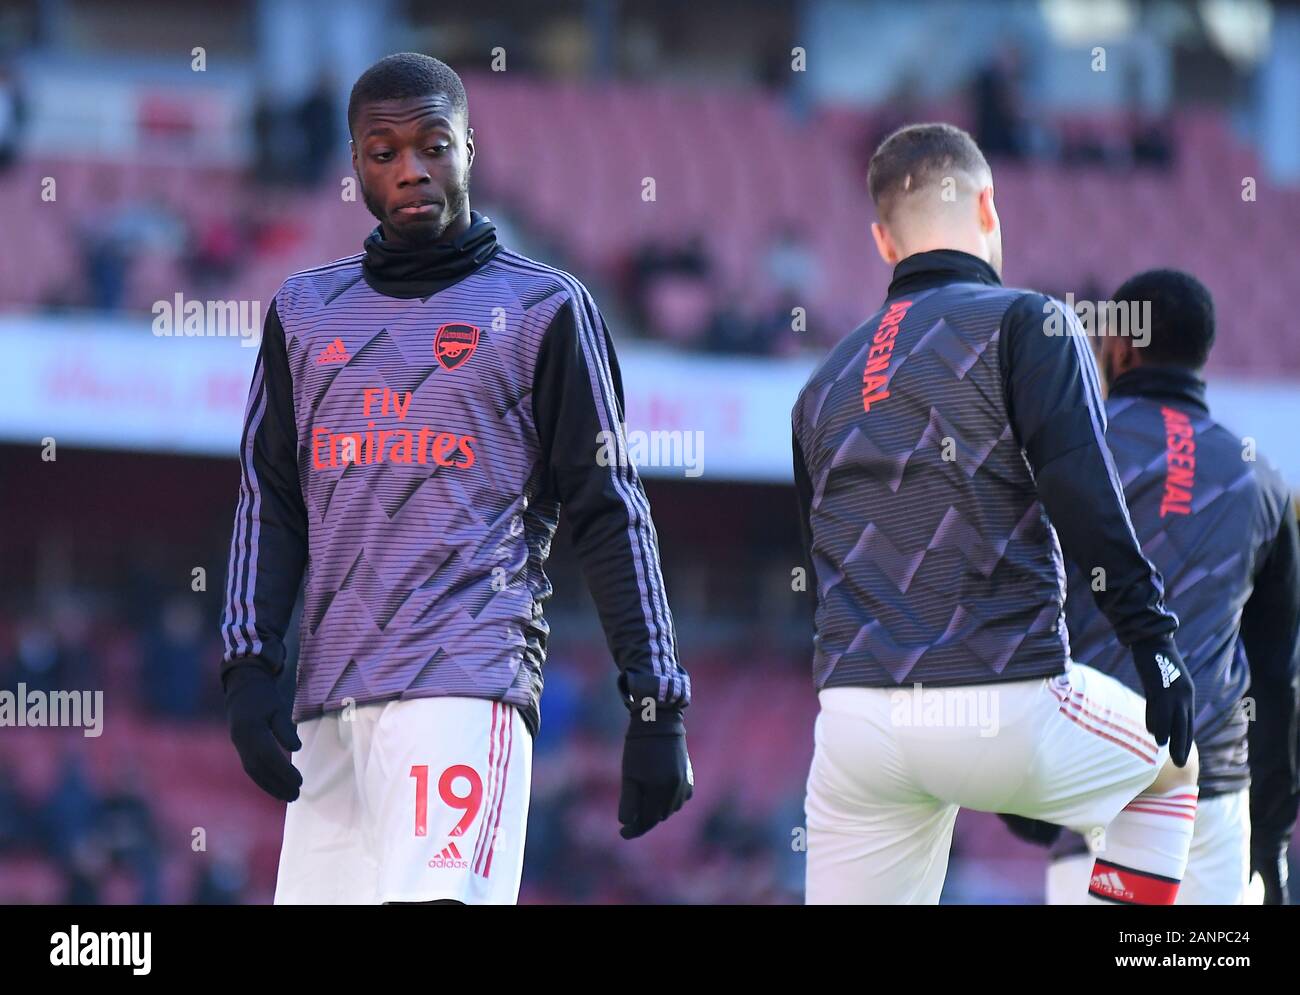 LONDON, ENGLAND - JANUARY 18, 2020: Nicolas Pepe of Arsenal pictured ahead of the 2019/20 Premier League game between Arsenal FC and Sheffield United FC at Emirates Stadium. Stock Photo